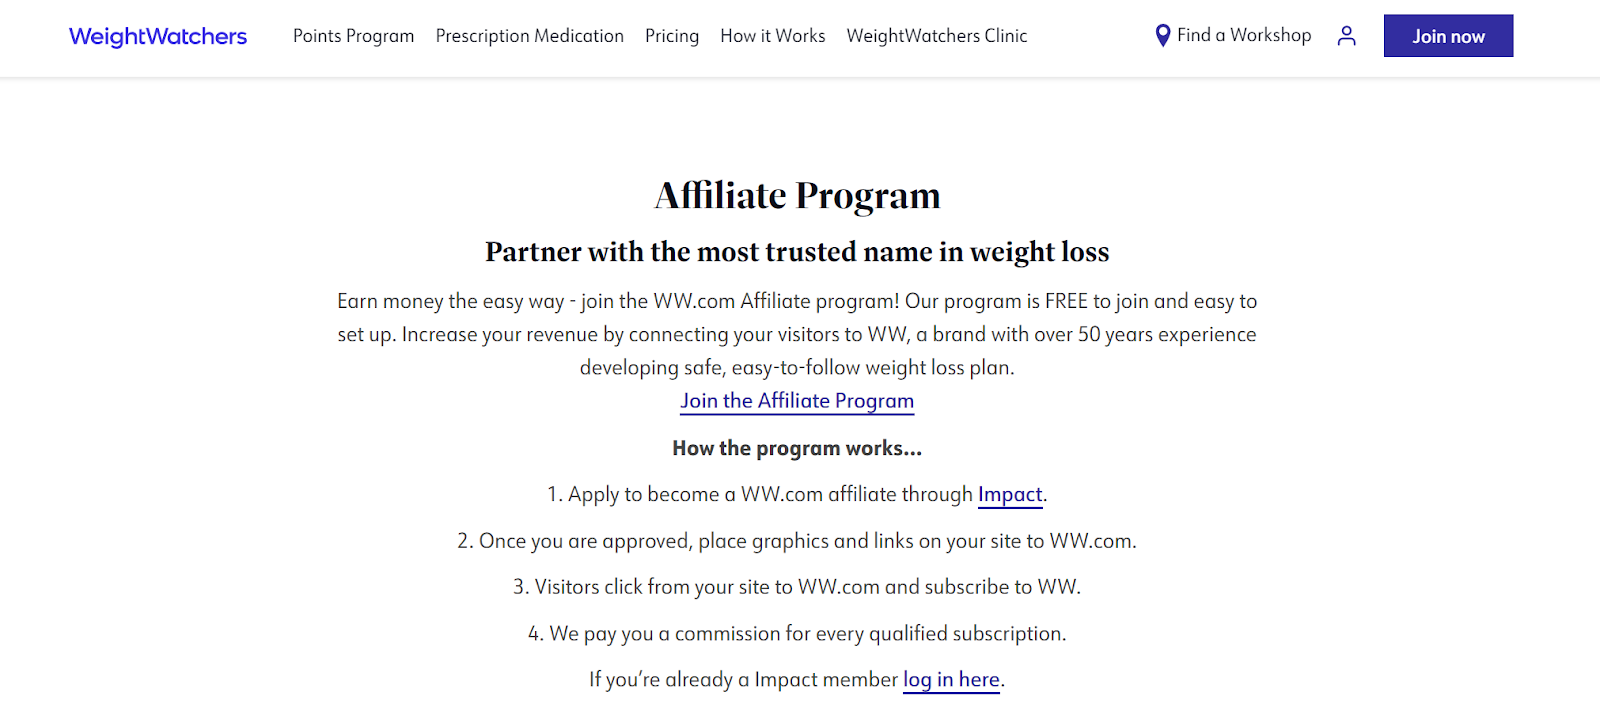 Weight Watchers affiliate program website home page